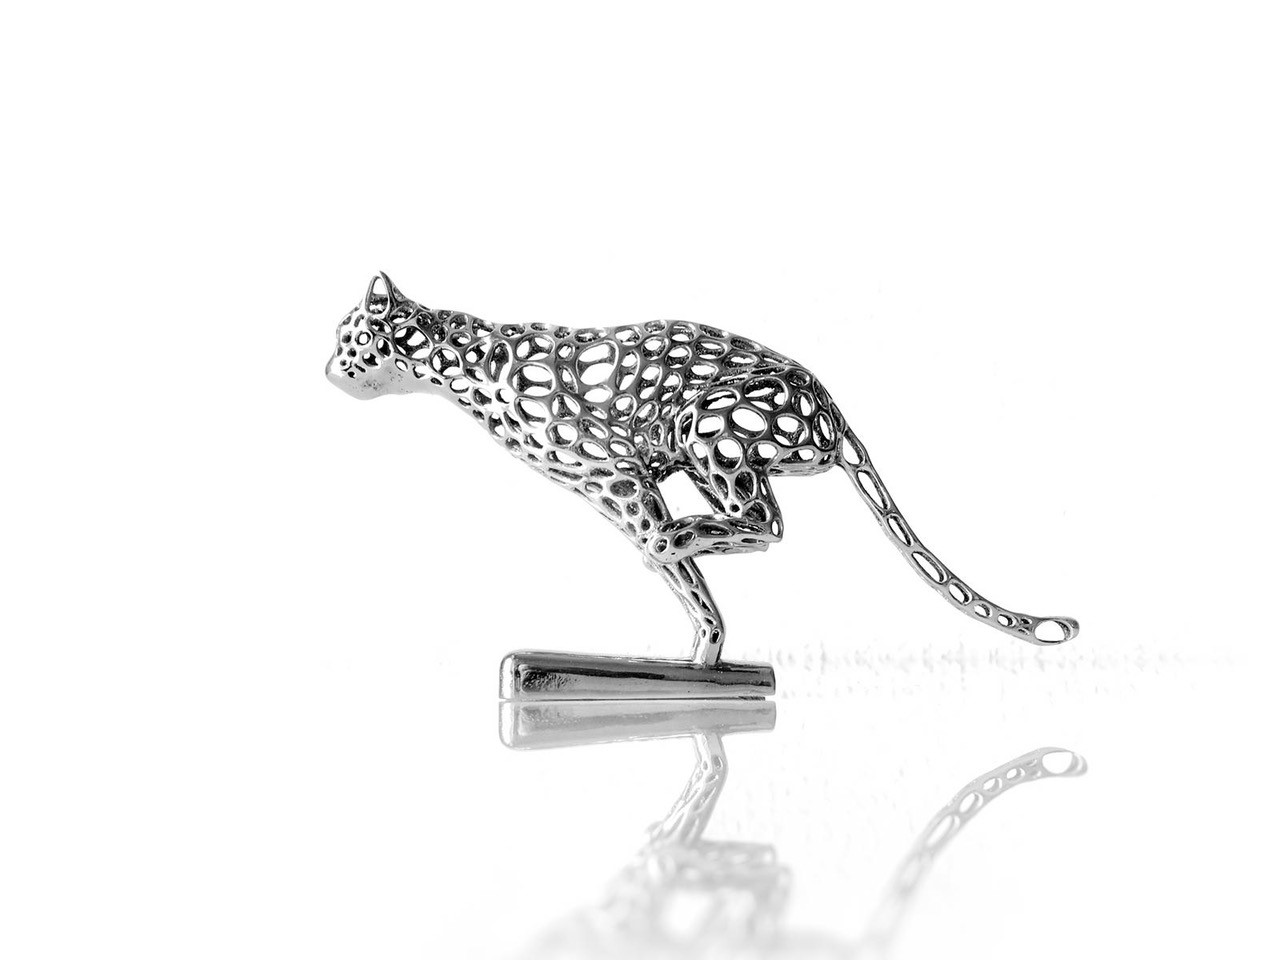 Cheetah hood ornament made of metal, printed with the new low-cost LPBF machine Alpha 140.